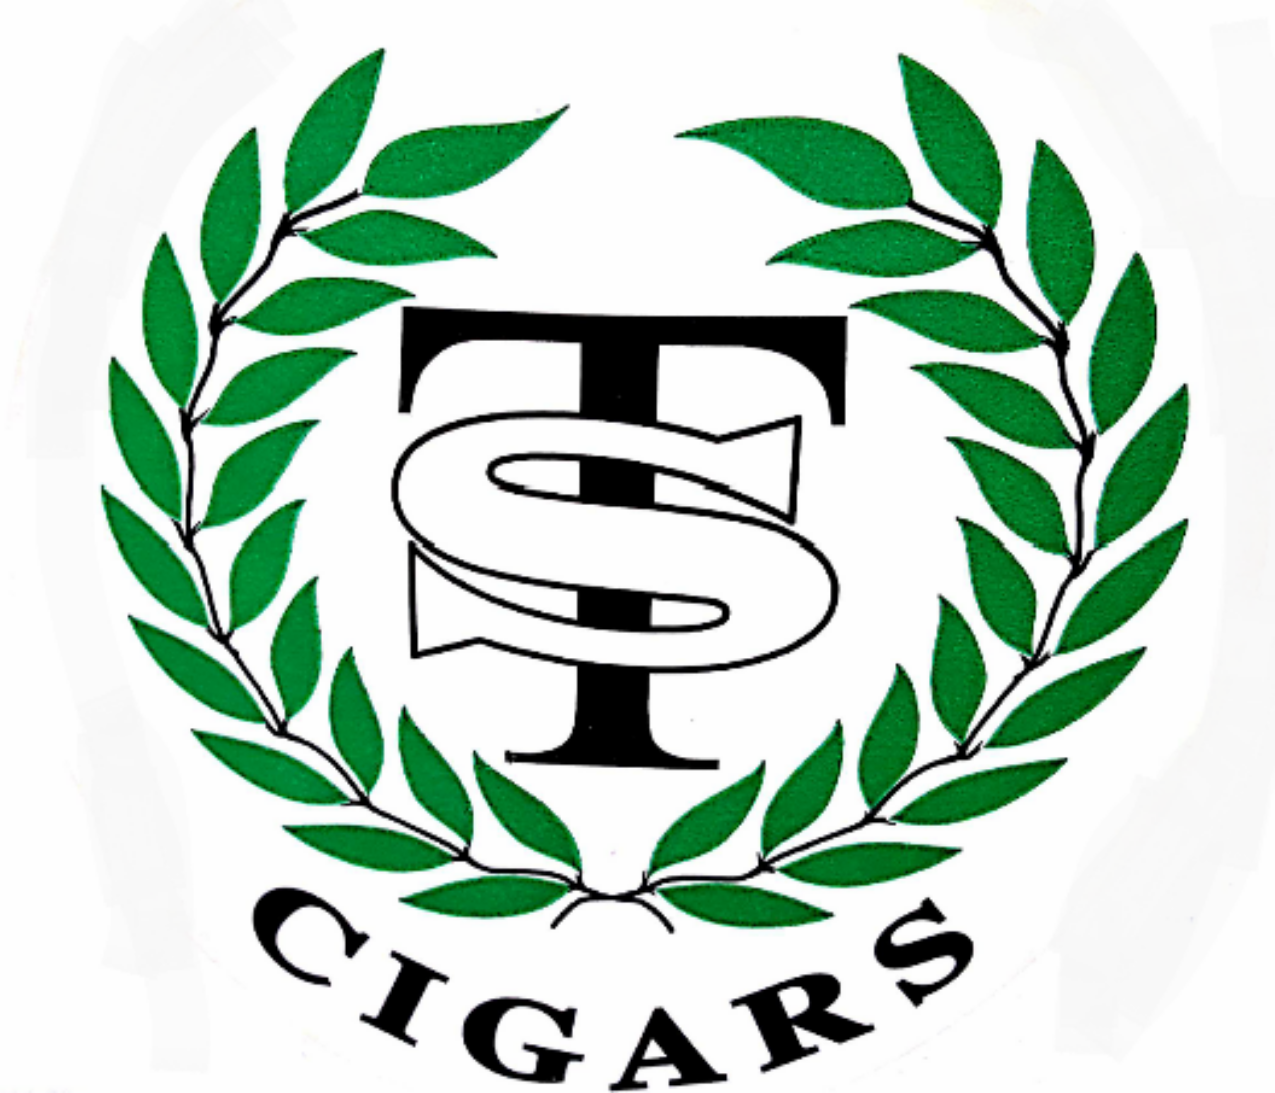 S.T.CIGARS